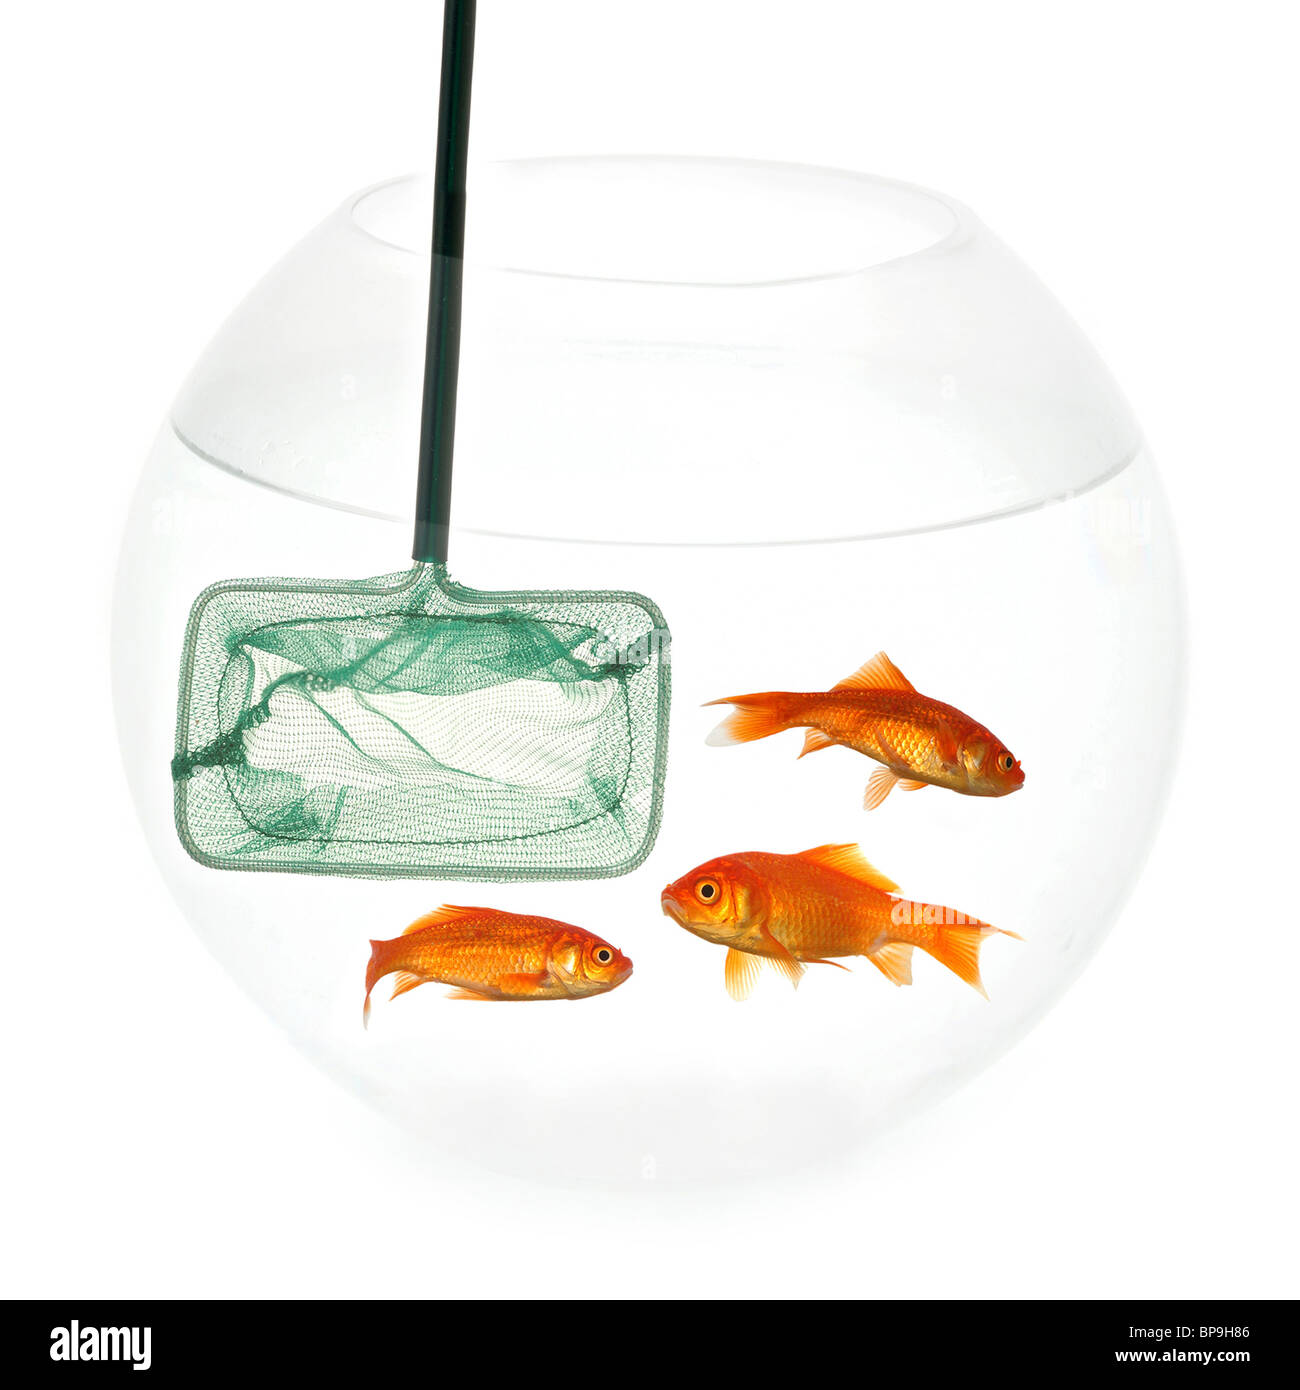 https://c8.alamy.com/comp/BP9H86/fishing-net-in-a-fishbowl-with-goldfish-taken-on-a-clean-white-background-BP9H86.jpg